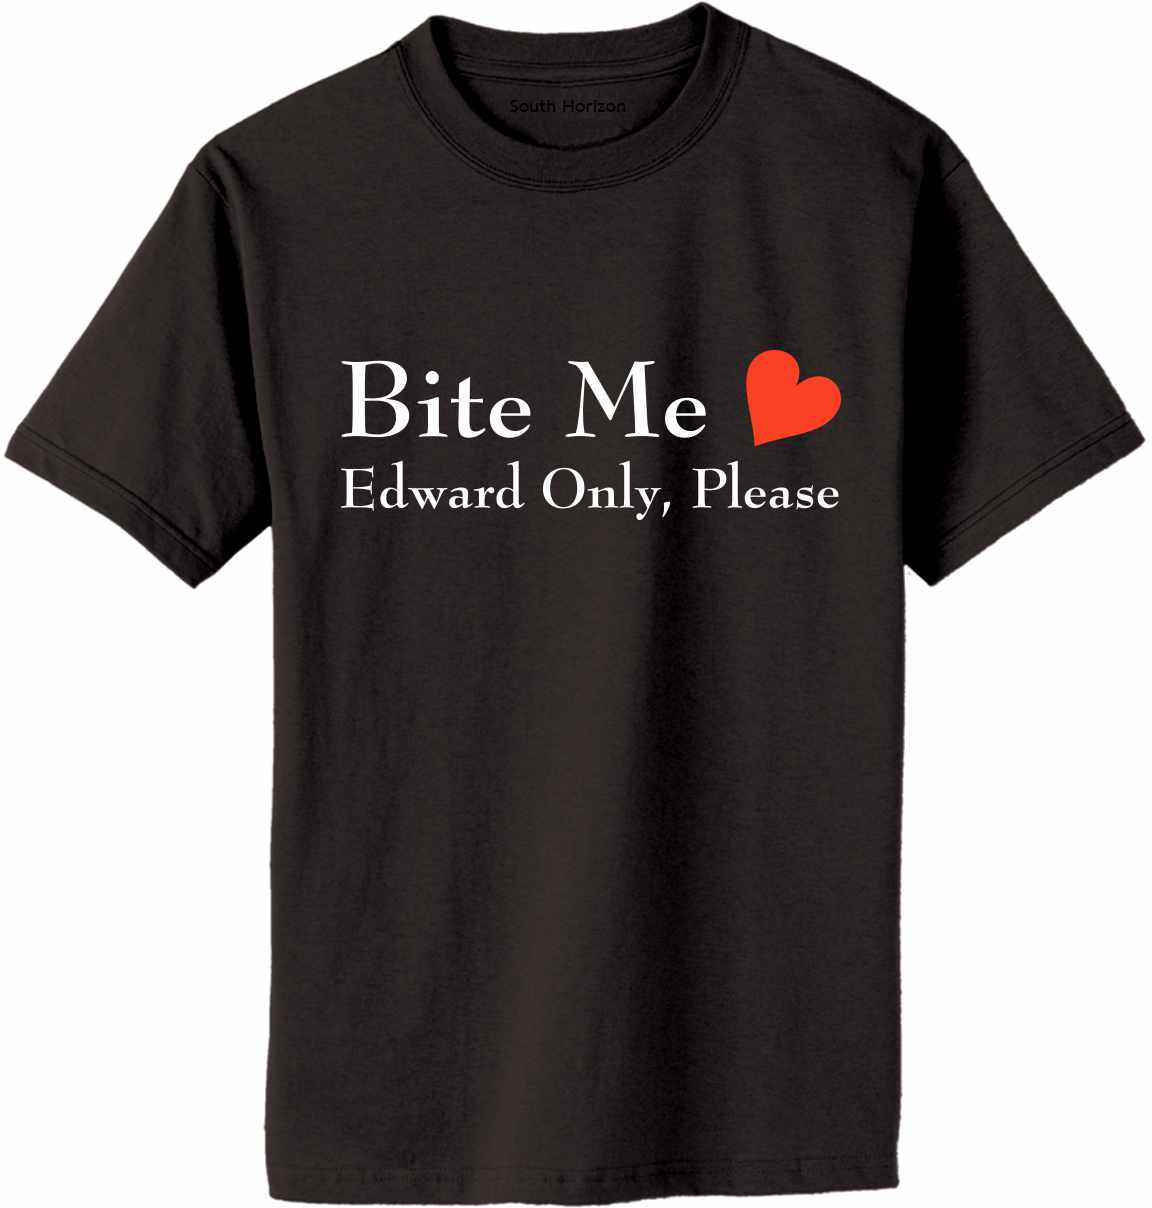 BITE ME, Edward Only Please on Adult T-Shirt